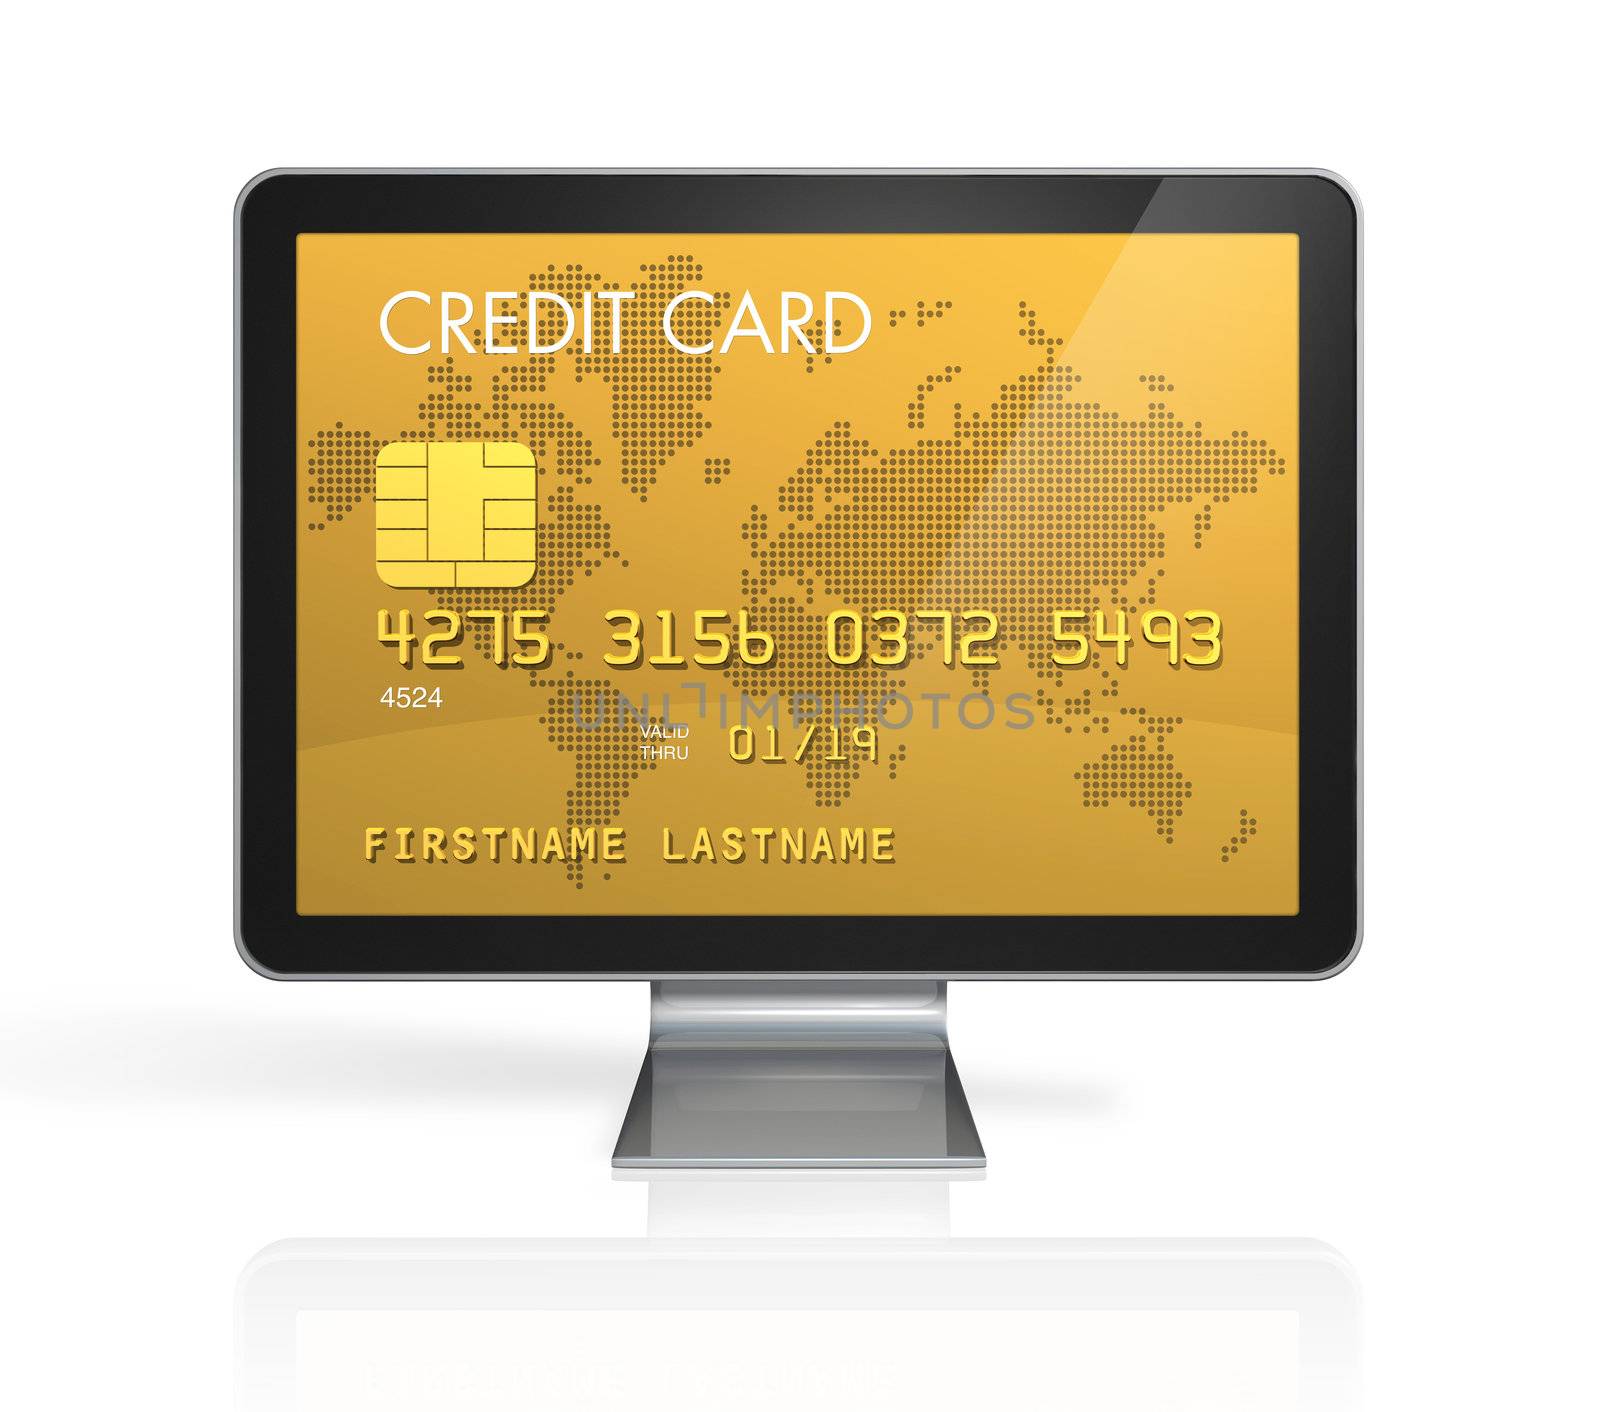 gold credit card on a computer screen by daboost